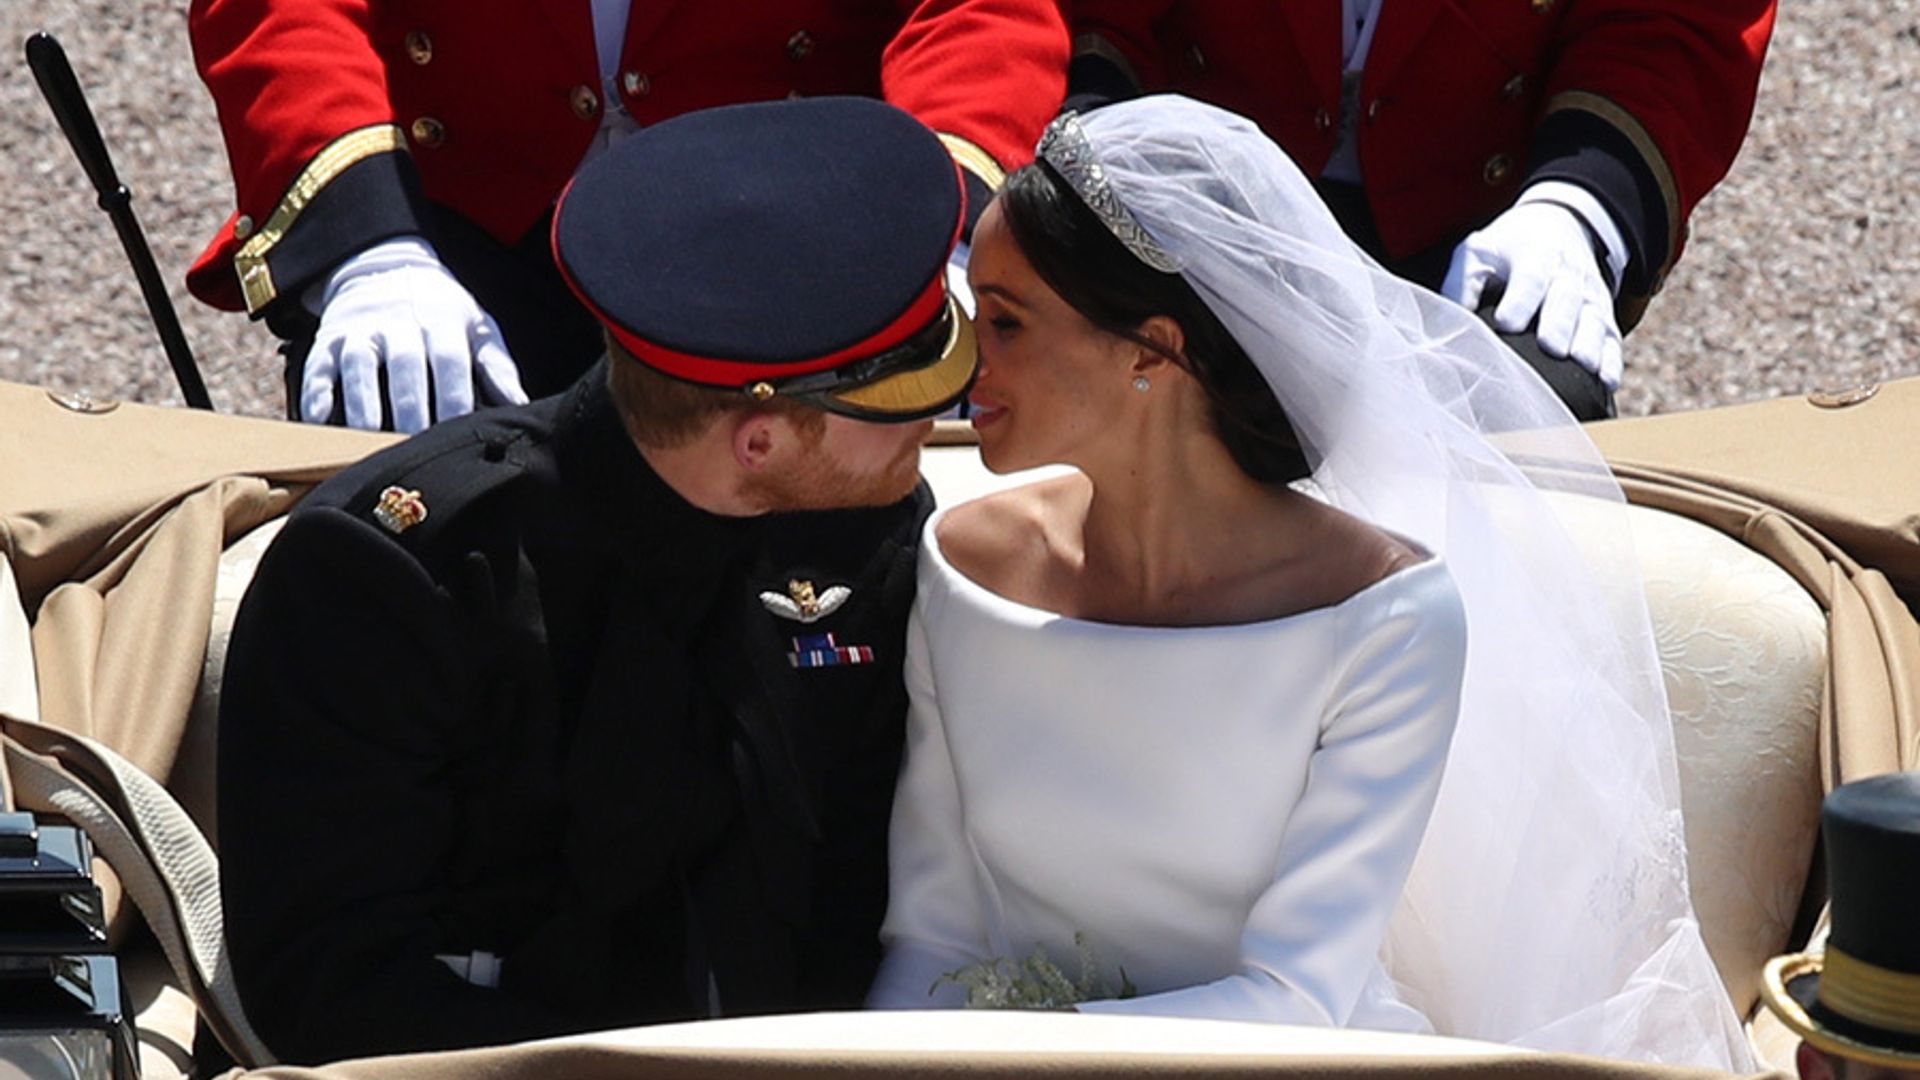 See the most romantic Prince Harry and Meghan Markle moments from the royal wedding and beyond – video